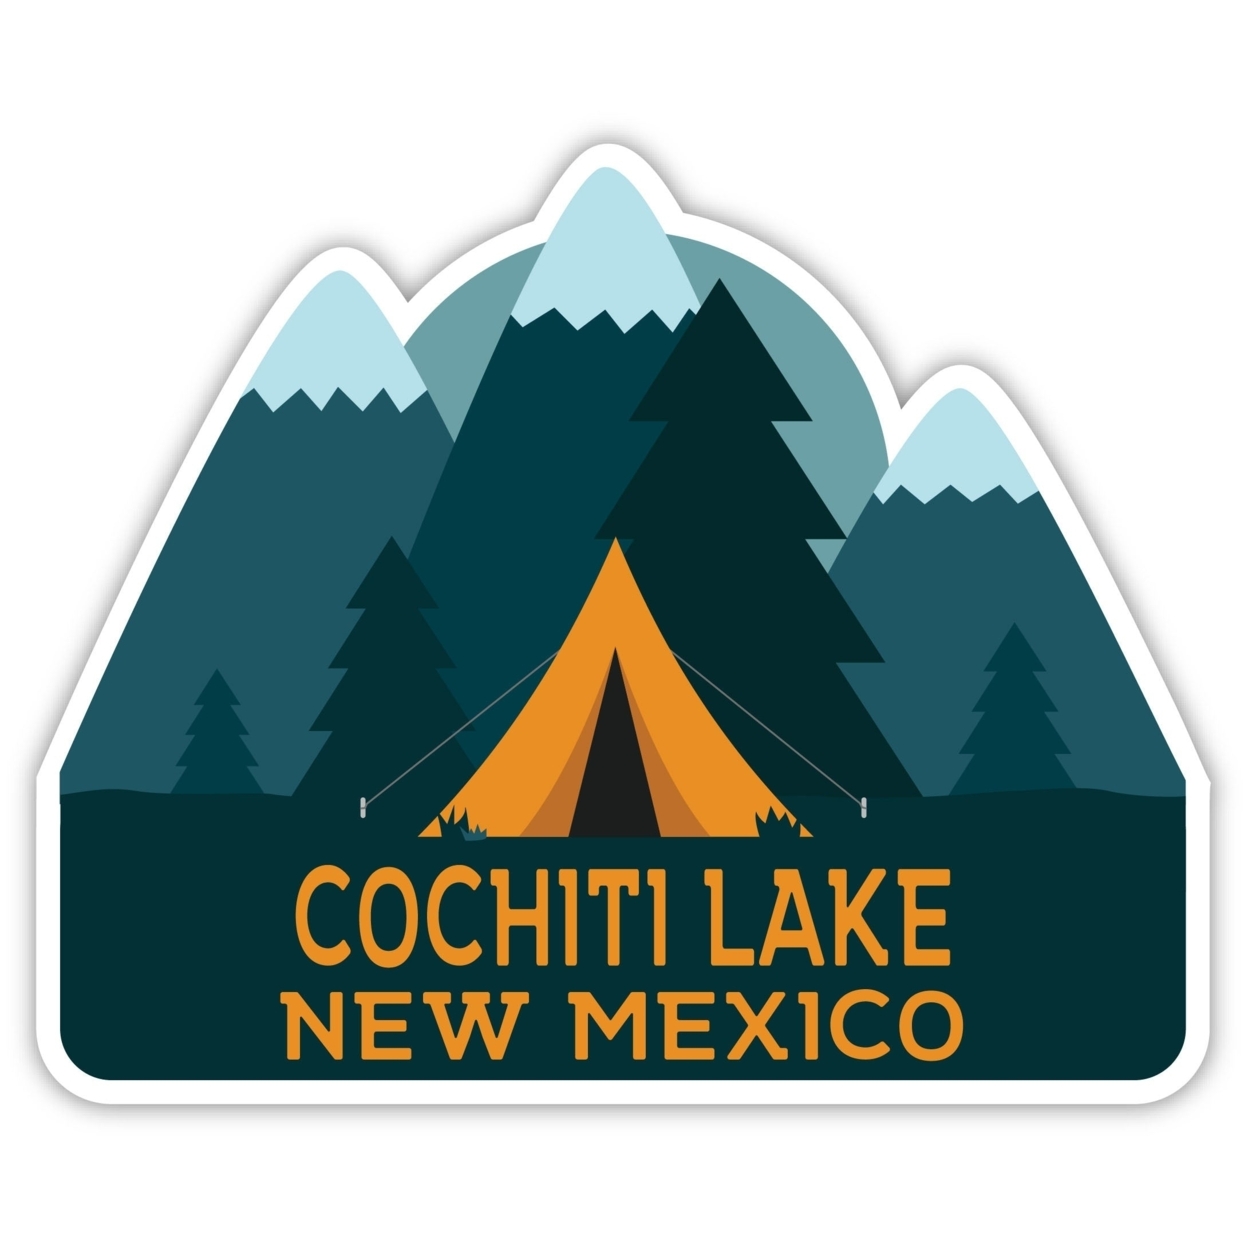 Cochiti Lake New Mexico Souvenir Decorative Stickers (Choose Theme And Size) - 4-Pack, 12-Inch, Tent